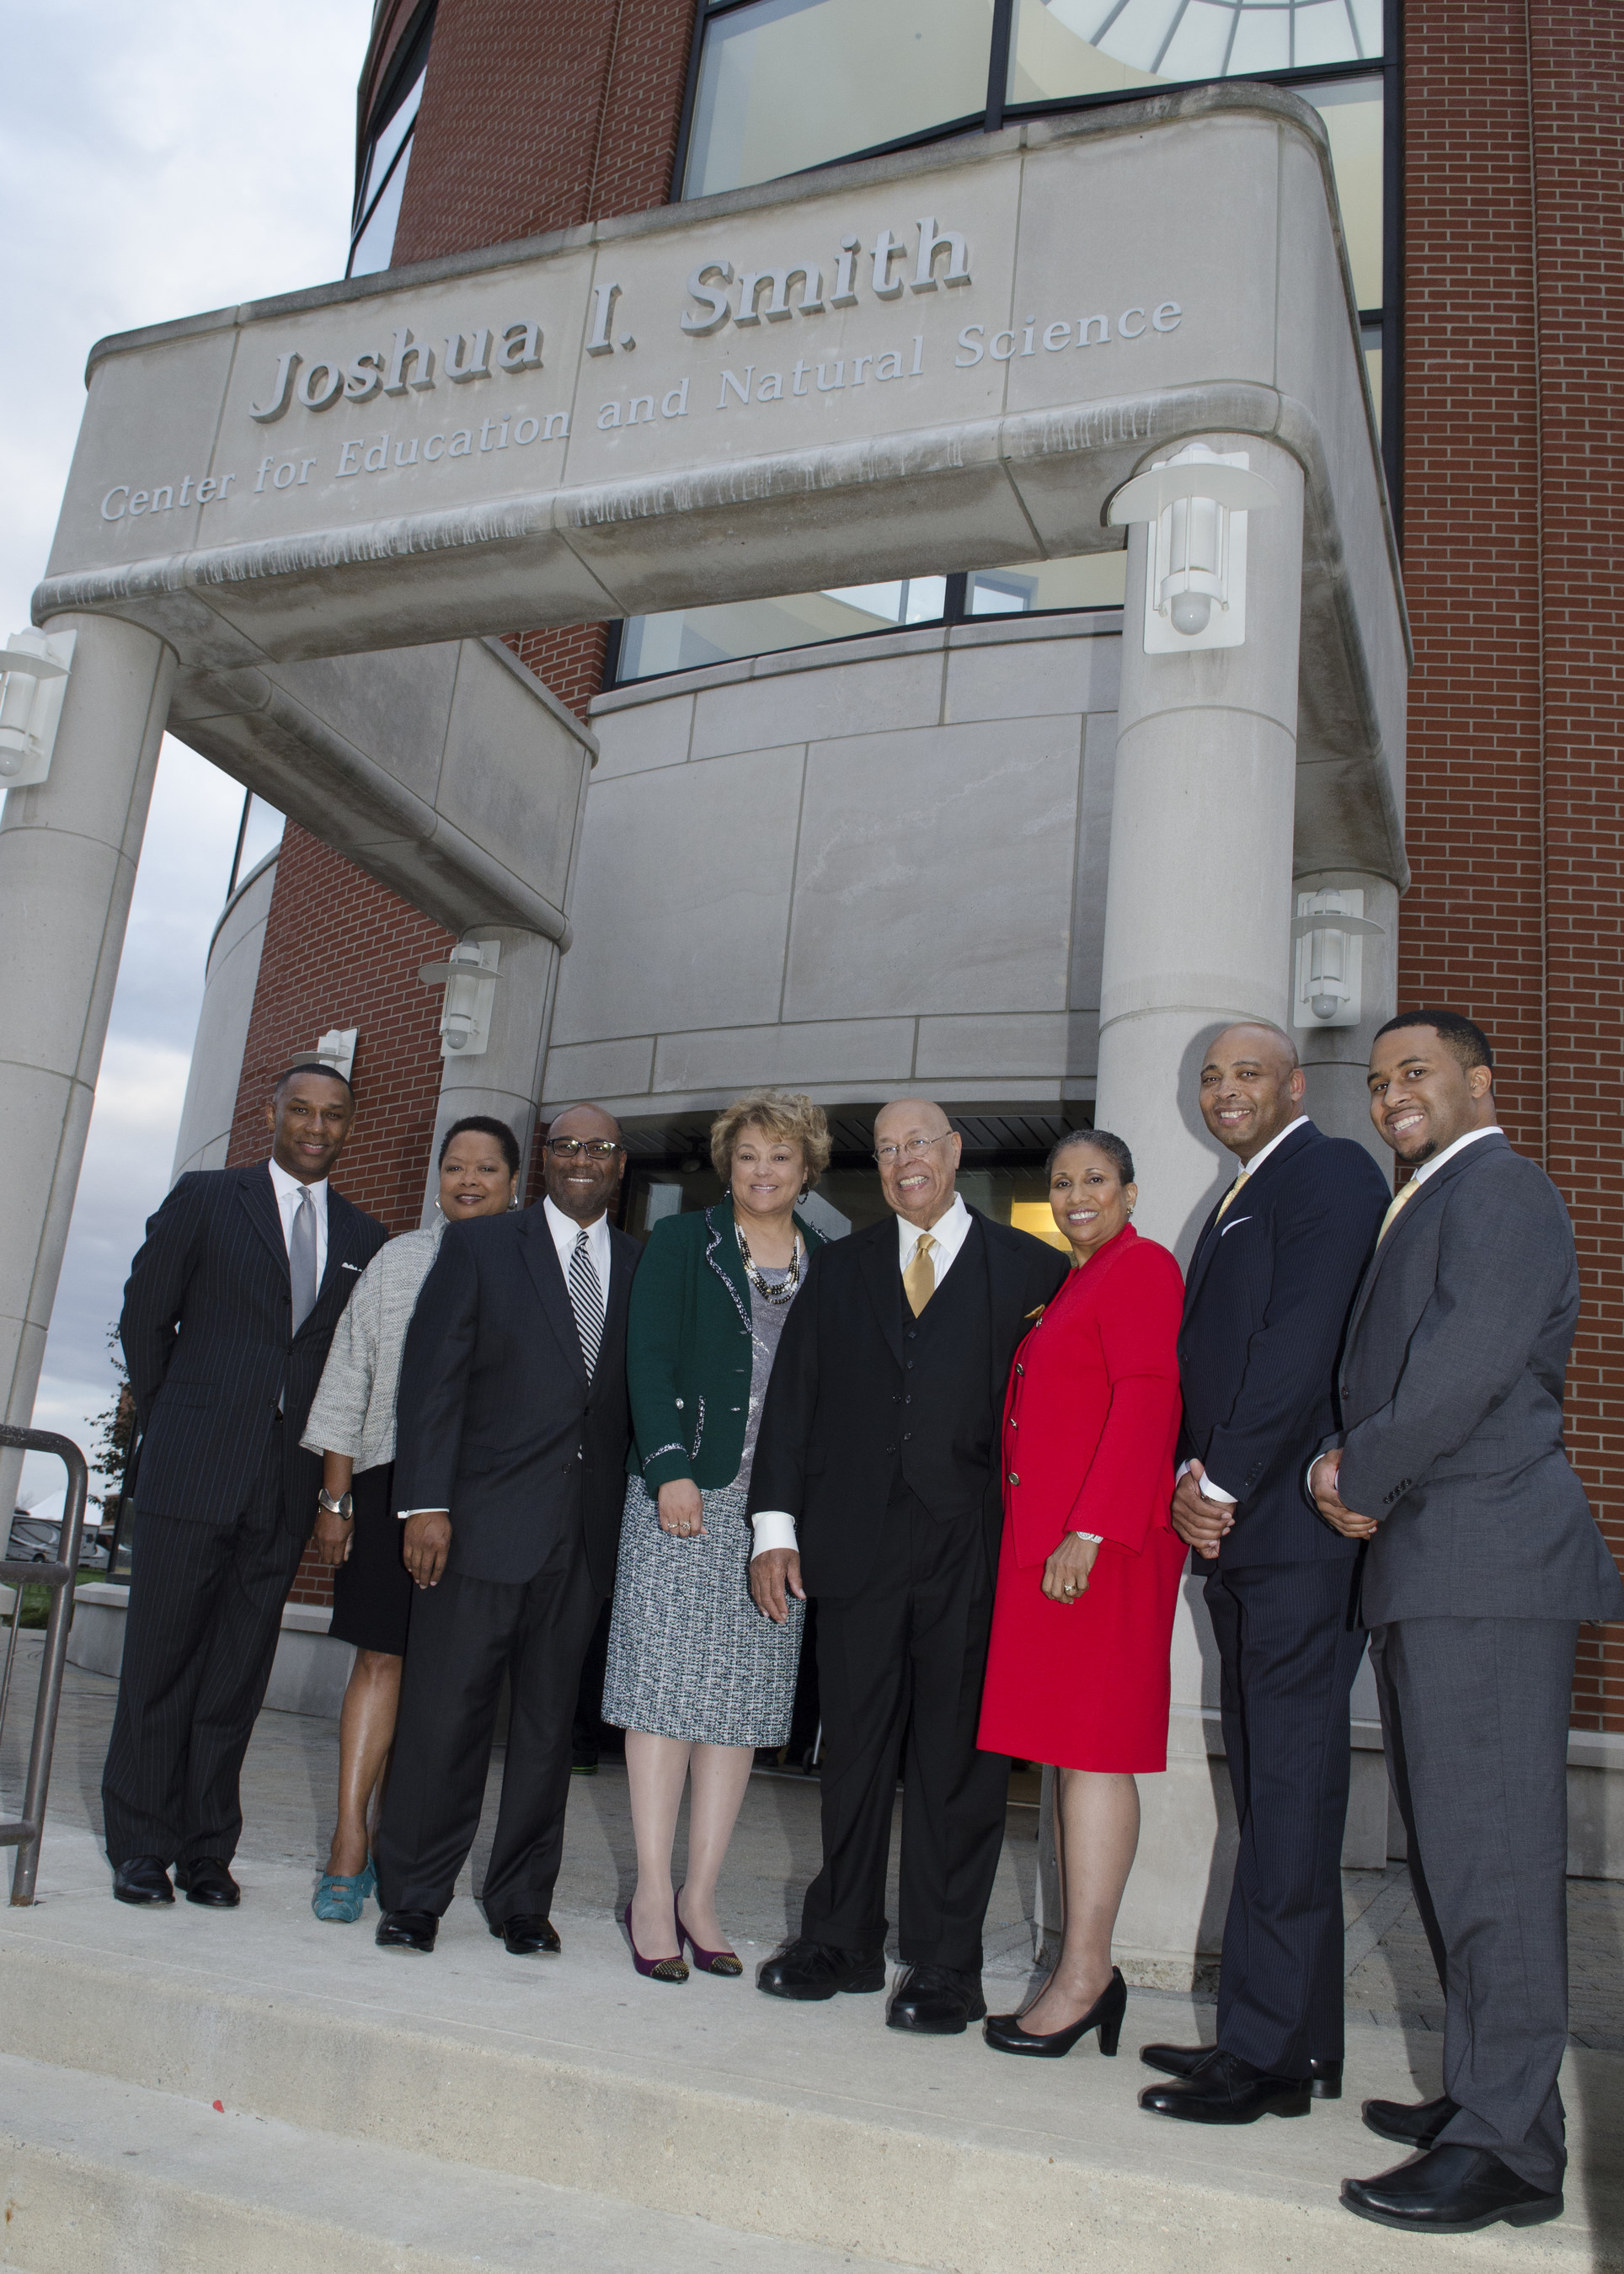 Businessman and philanthropist Dr. Joshua I. Smith is joined at the building renaming ceremony by Central State University president Dr. Cynthia Jackson-Hammond, his wife Reverend Jacqueline Smith, Esquire and executives from Caterpillar, FedEx and Disney.